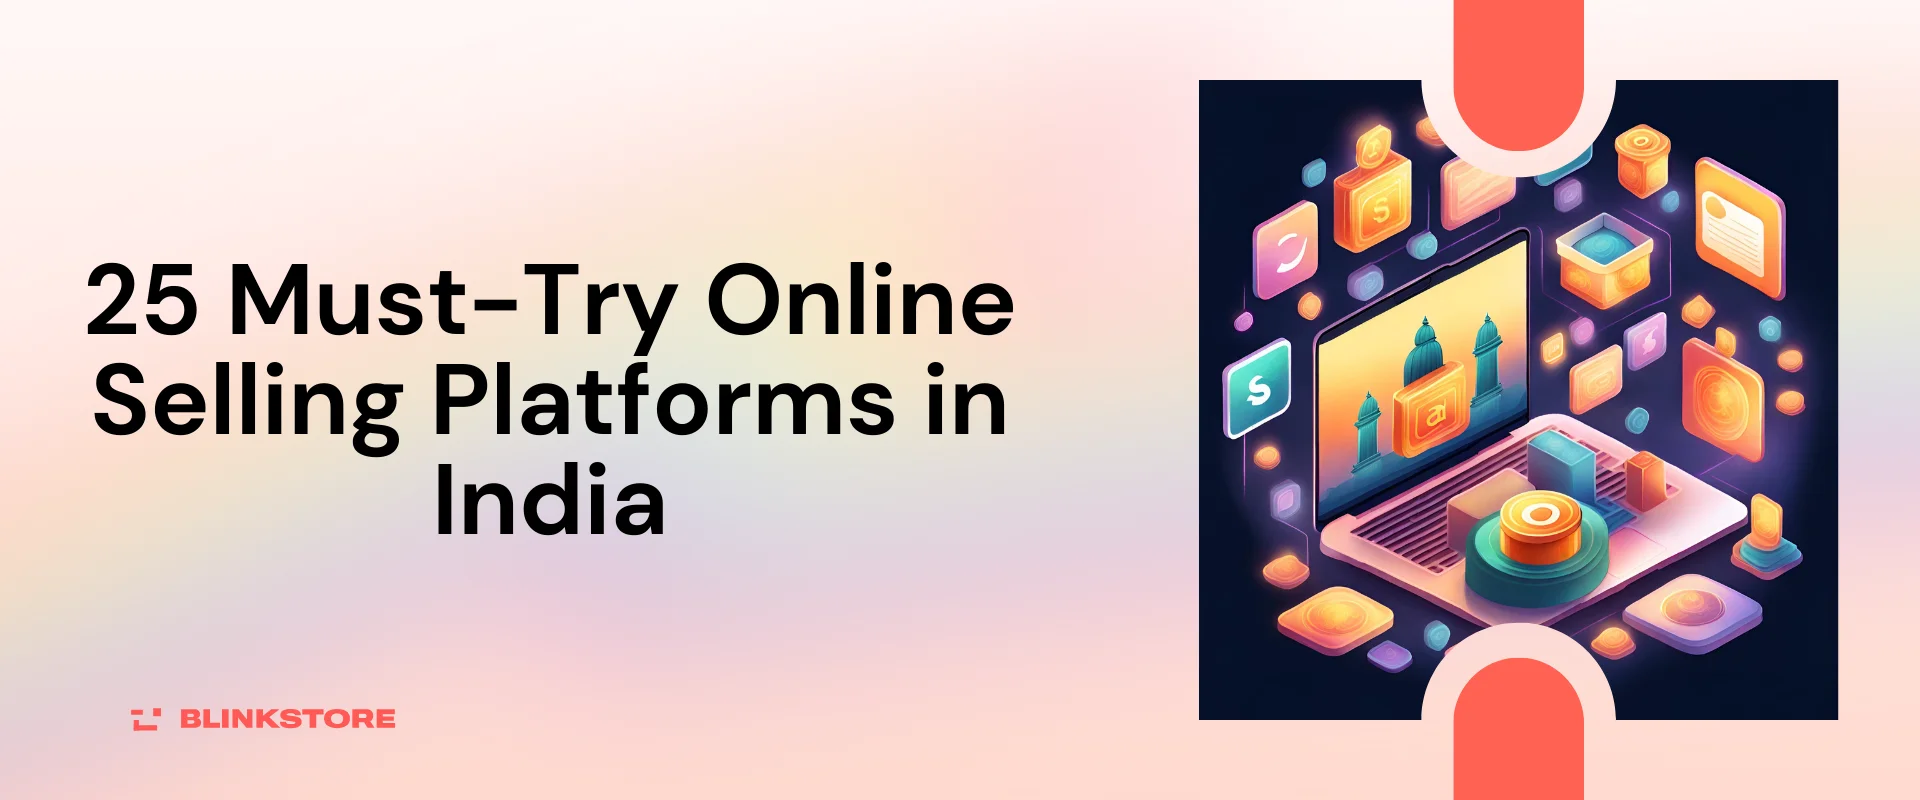 25 Must-Try Online Selling Platforms in India